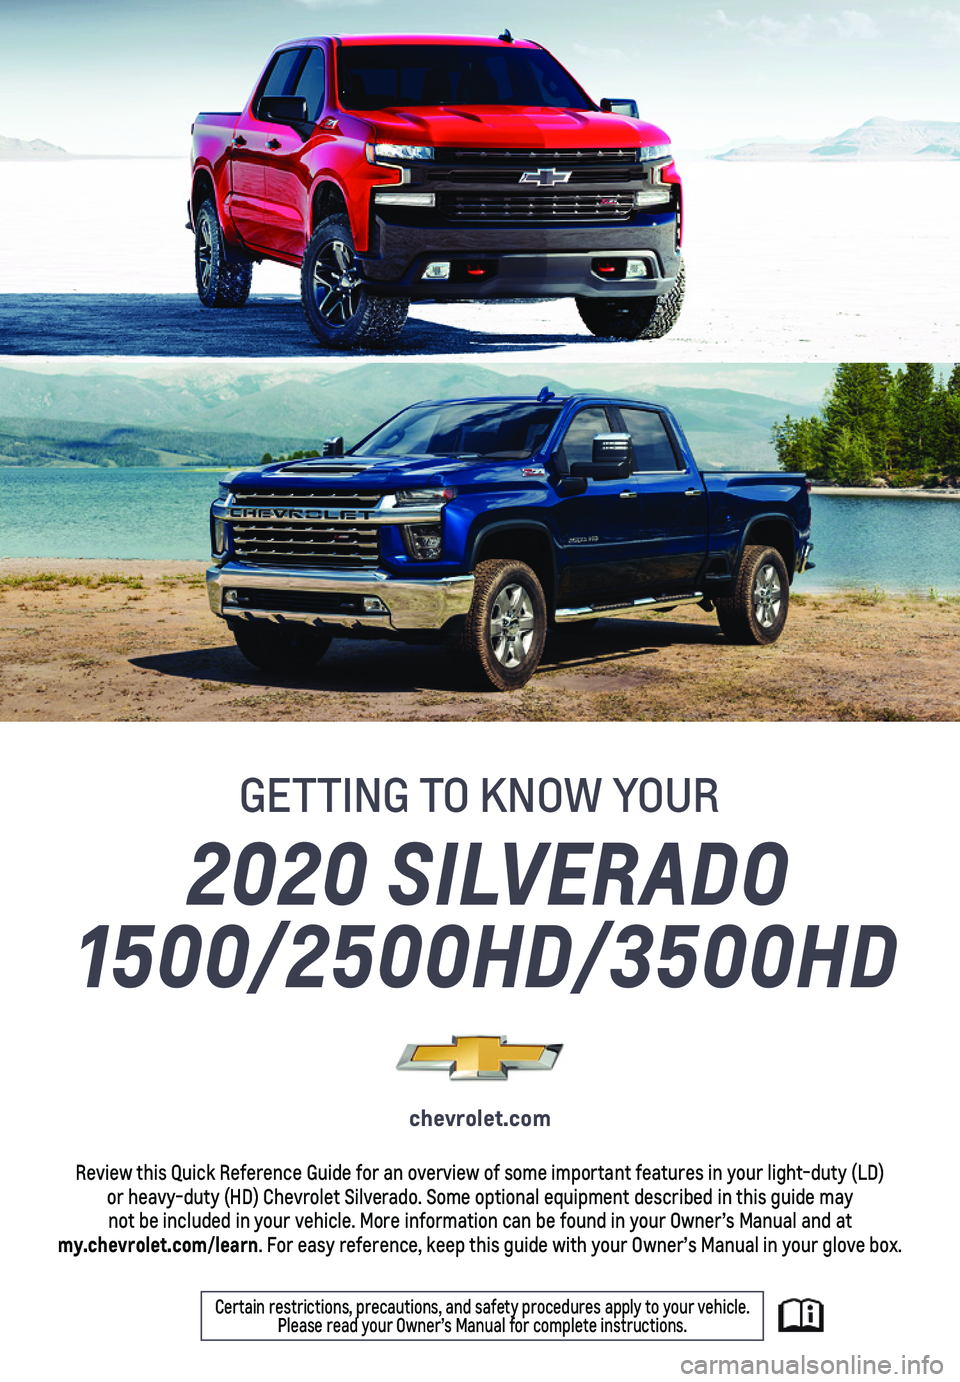 CHEVROLET SILVERADO 2020  Get To Know Guide 1
Certain restrictions, precautions, and safety procedures apply to your v\
ehicle.  Please read your Owner’s Manual for complete instructions.
2020 SILVERADO 
1500/2500HD/3500HD
chevrolet.com
Revie